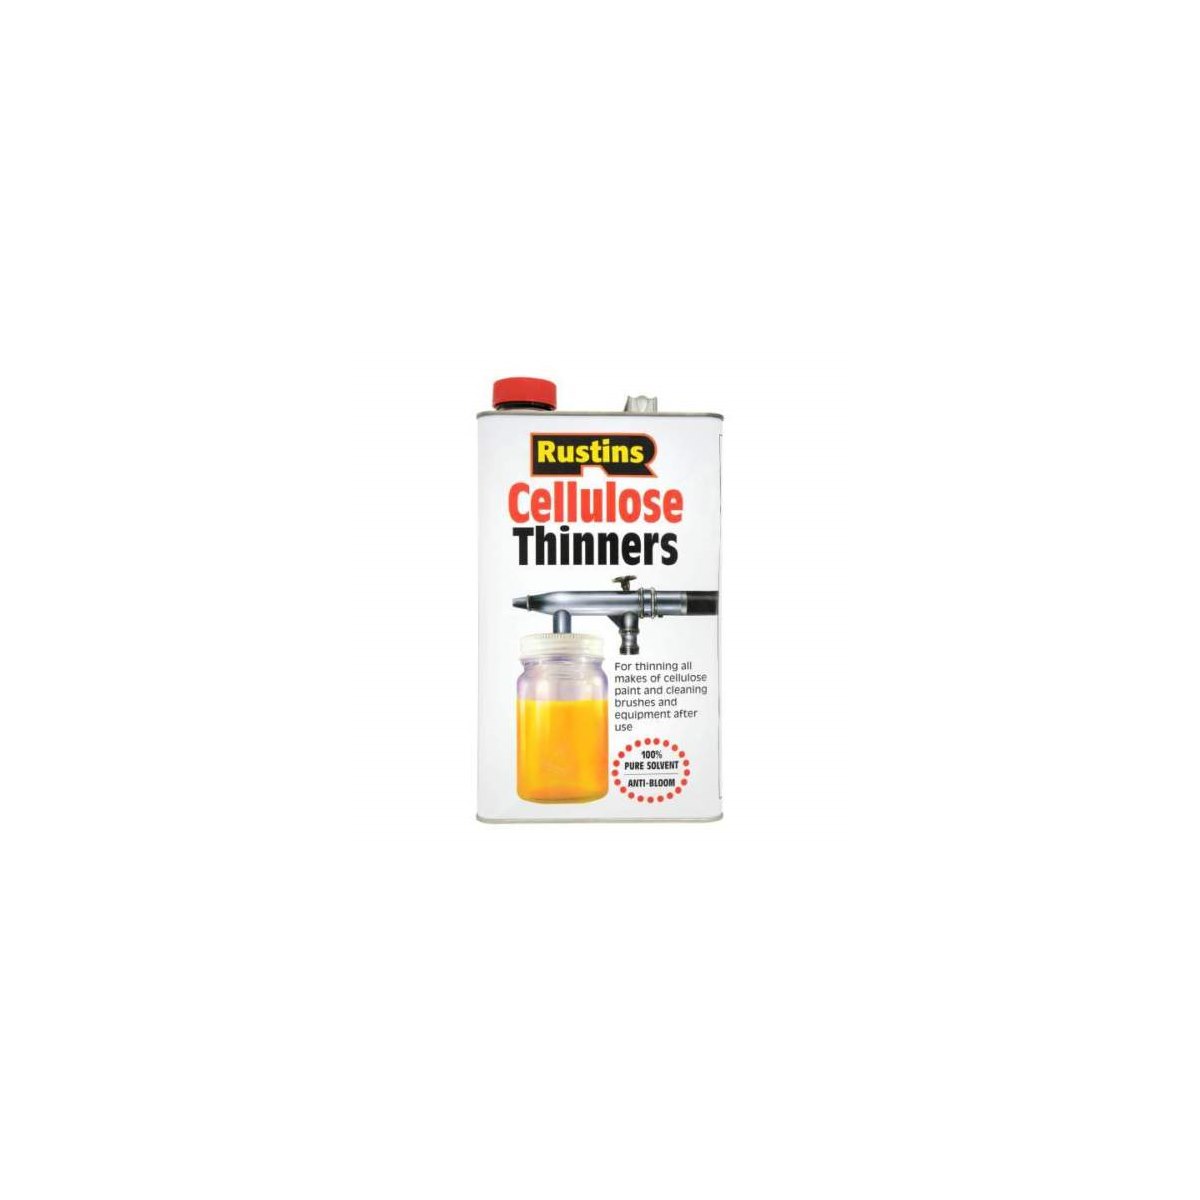 Rustins Cellulose Thinners 5 Litre